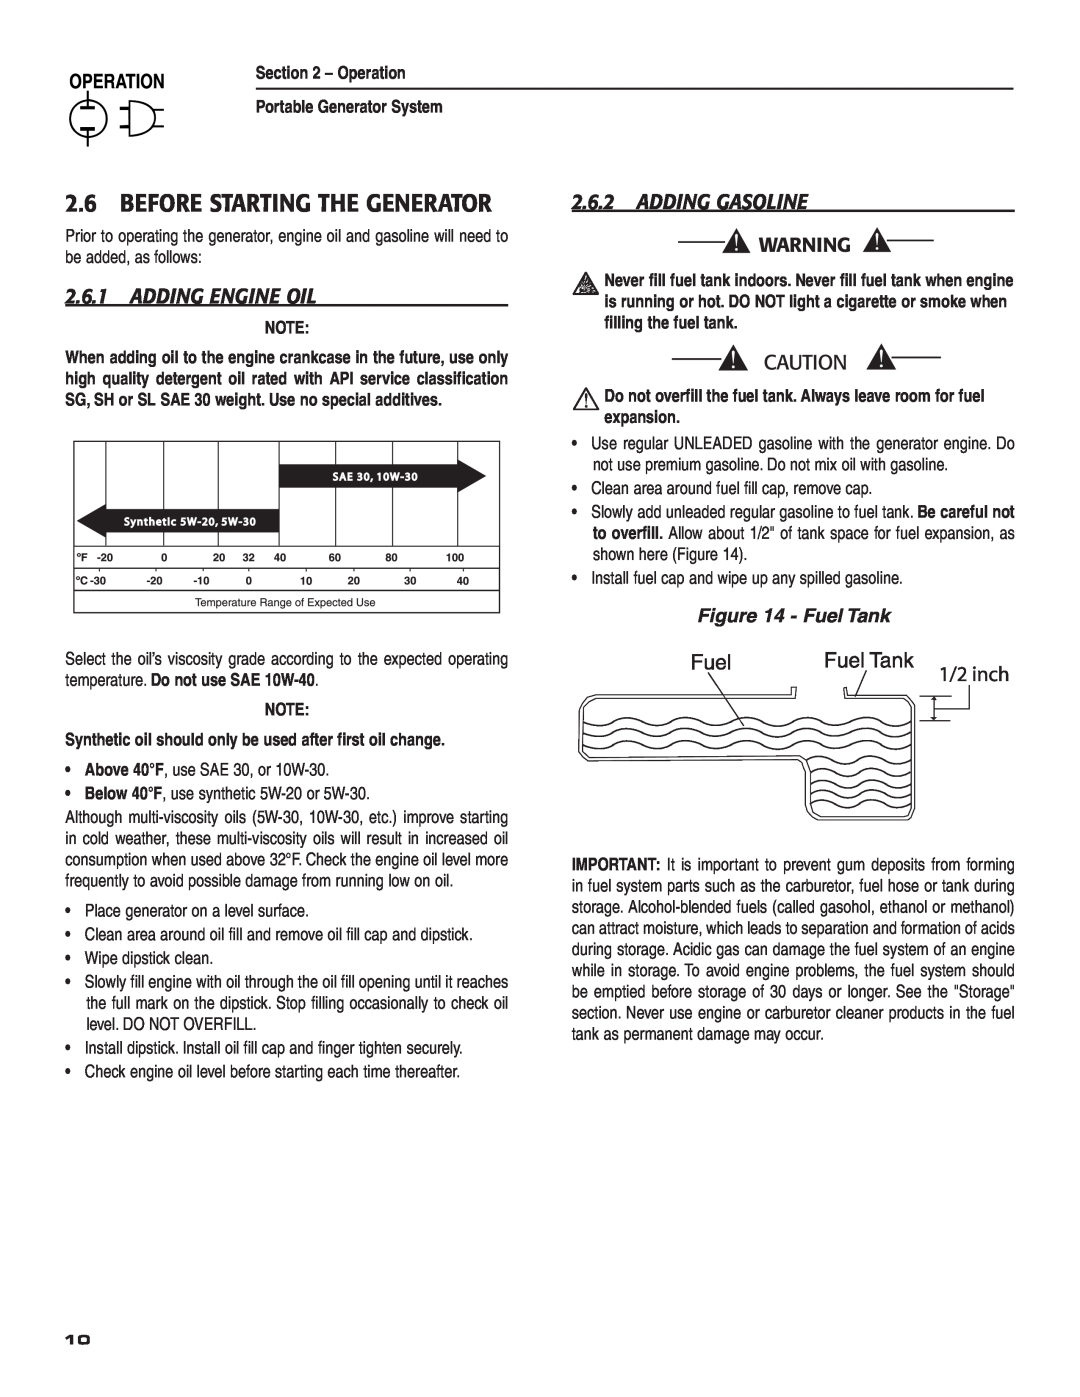 Guardian Technologies 004583-0 owner manual Adding Gasoline, Adding Engine Oil, Fuel Tank, Before Starting The Generator 